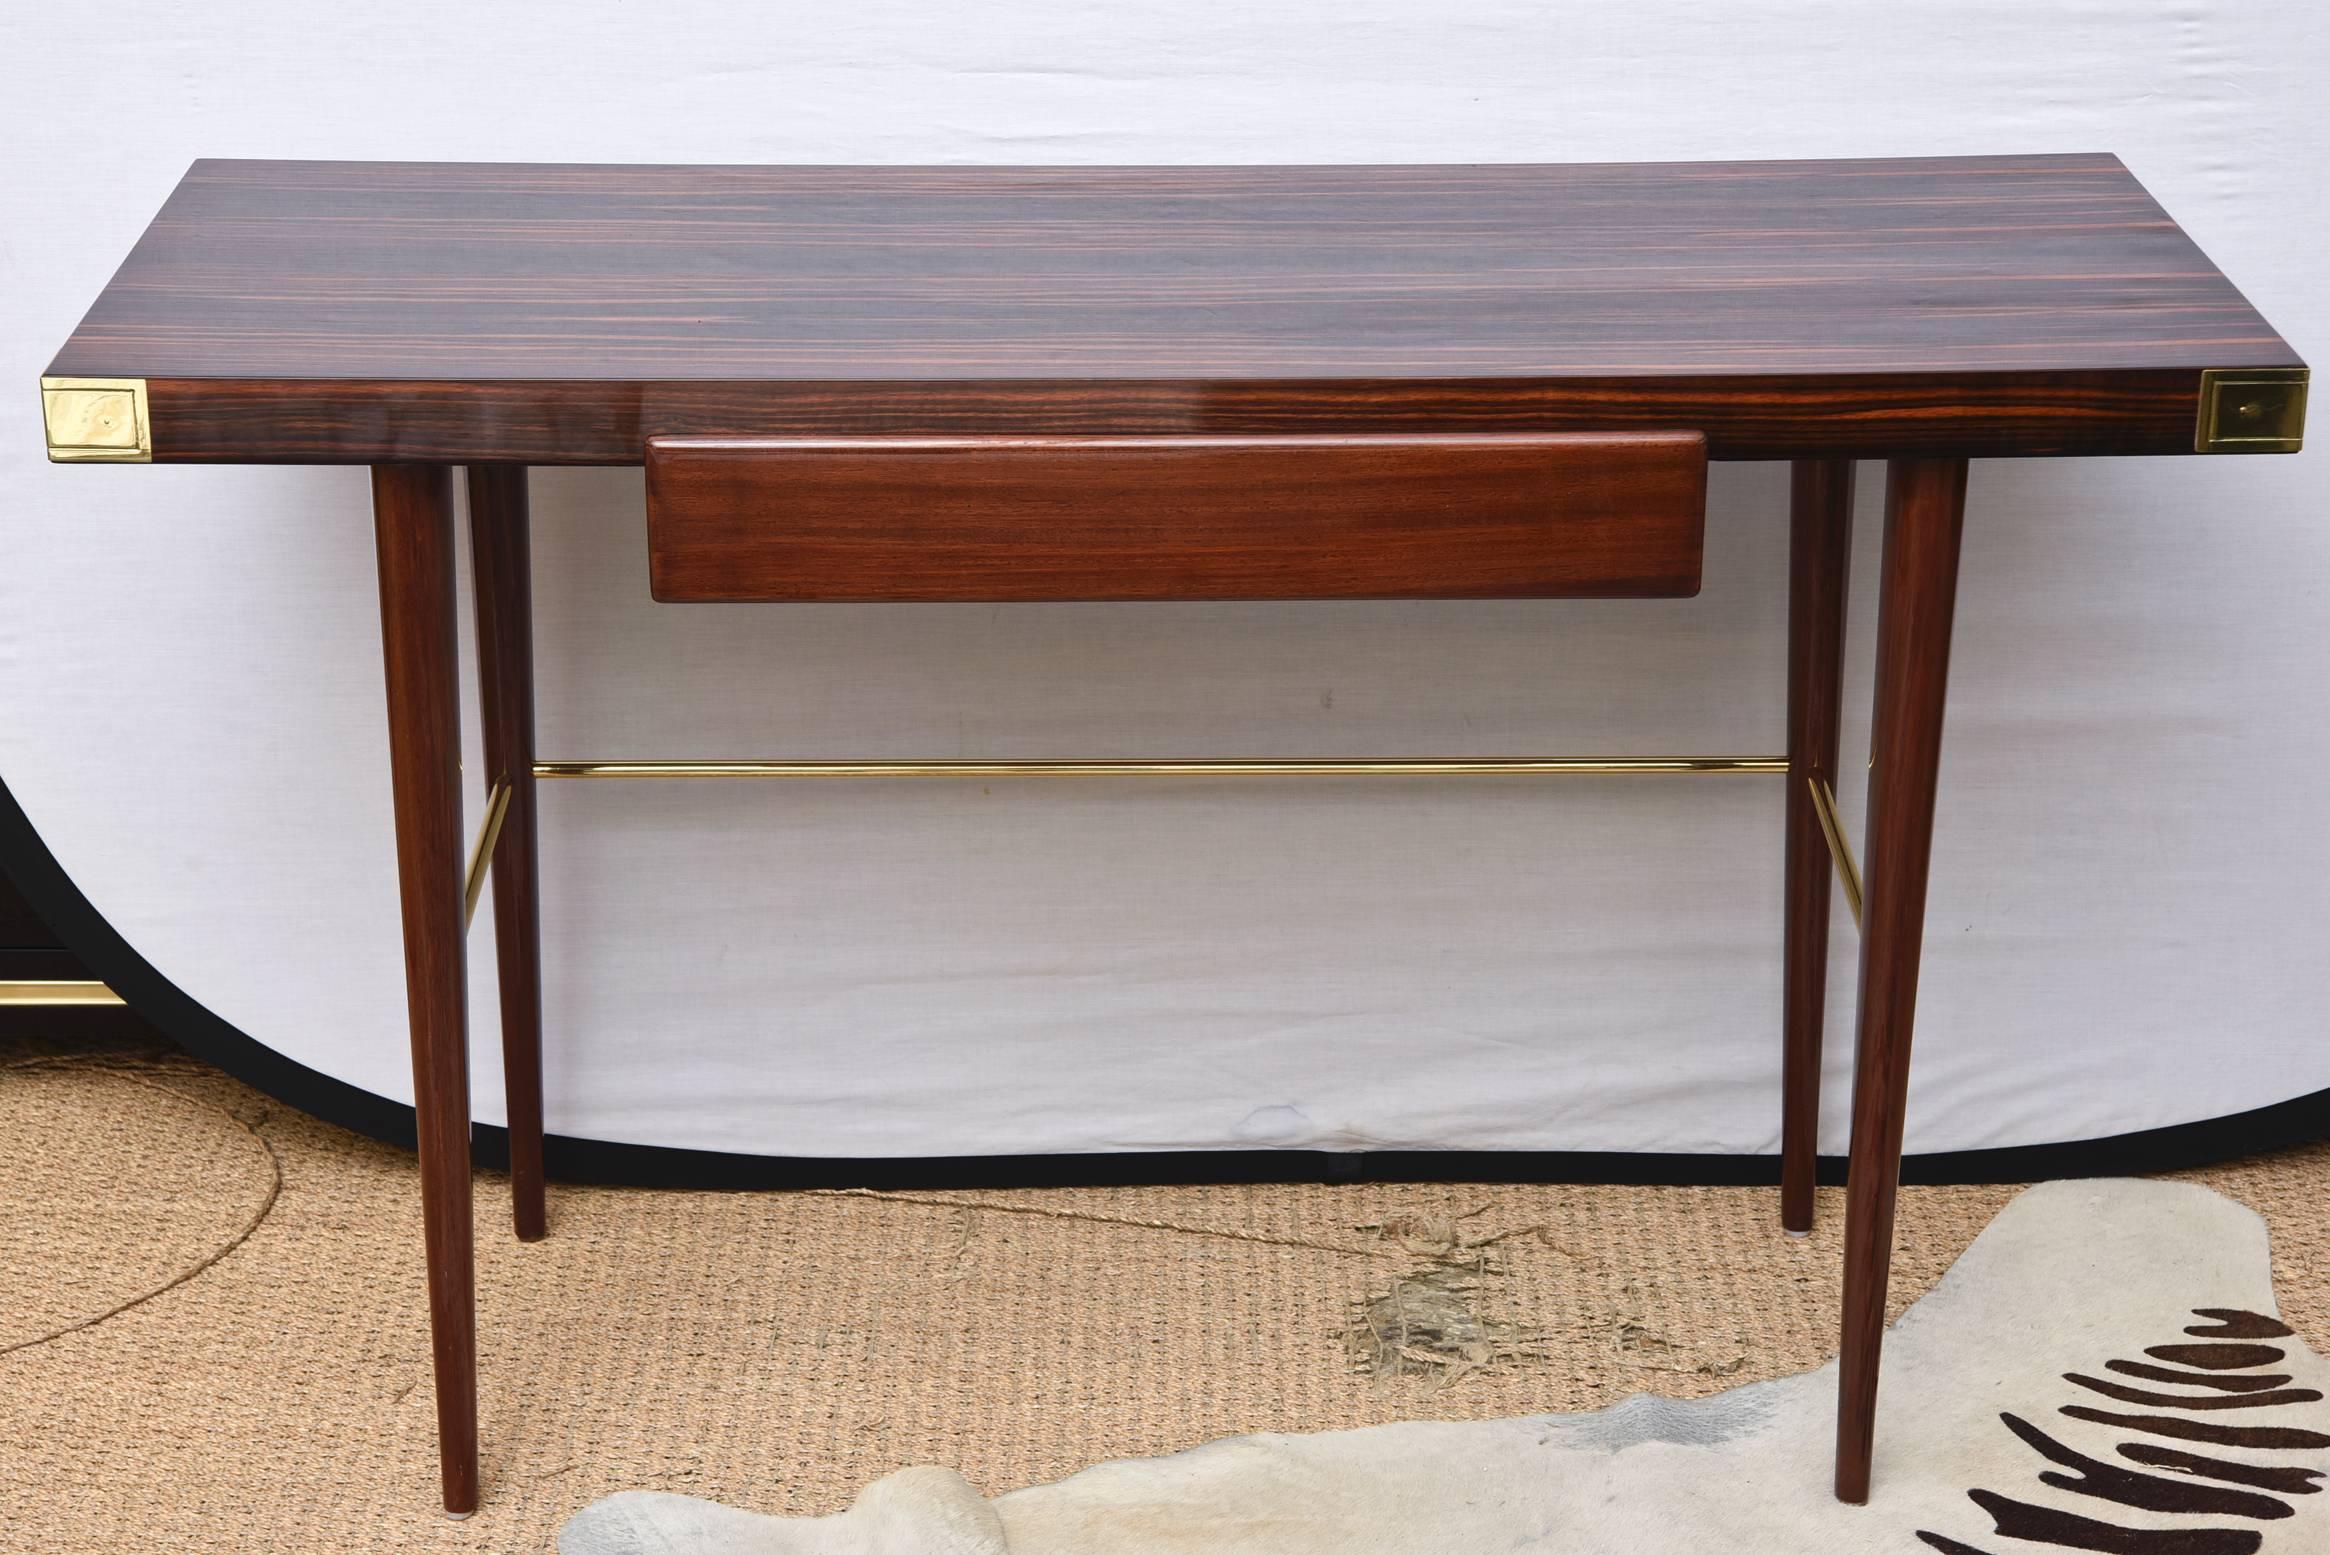 This sleek and fully restored Mid-Century Modern Walter Charak labeled desk and or writing desk for Tommi Parzinger is exquisite. The 4 polished brass corner tabs and brass stretcher on the bottom compliment the beautiful woods of Macassar ebony on